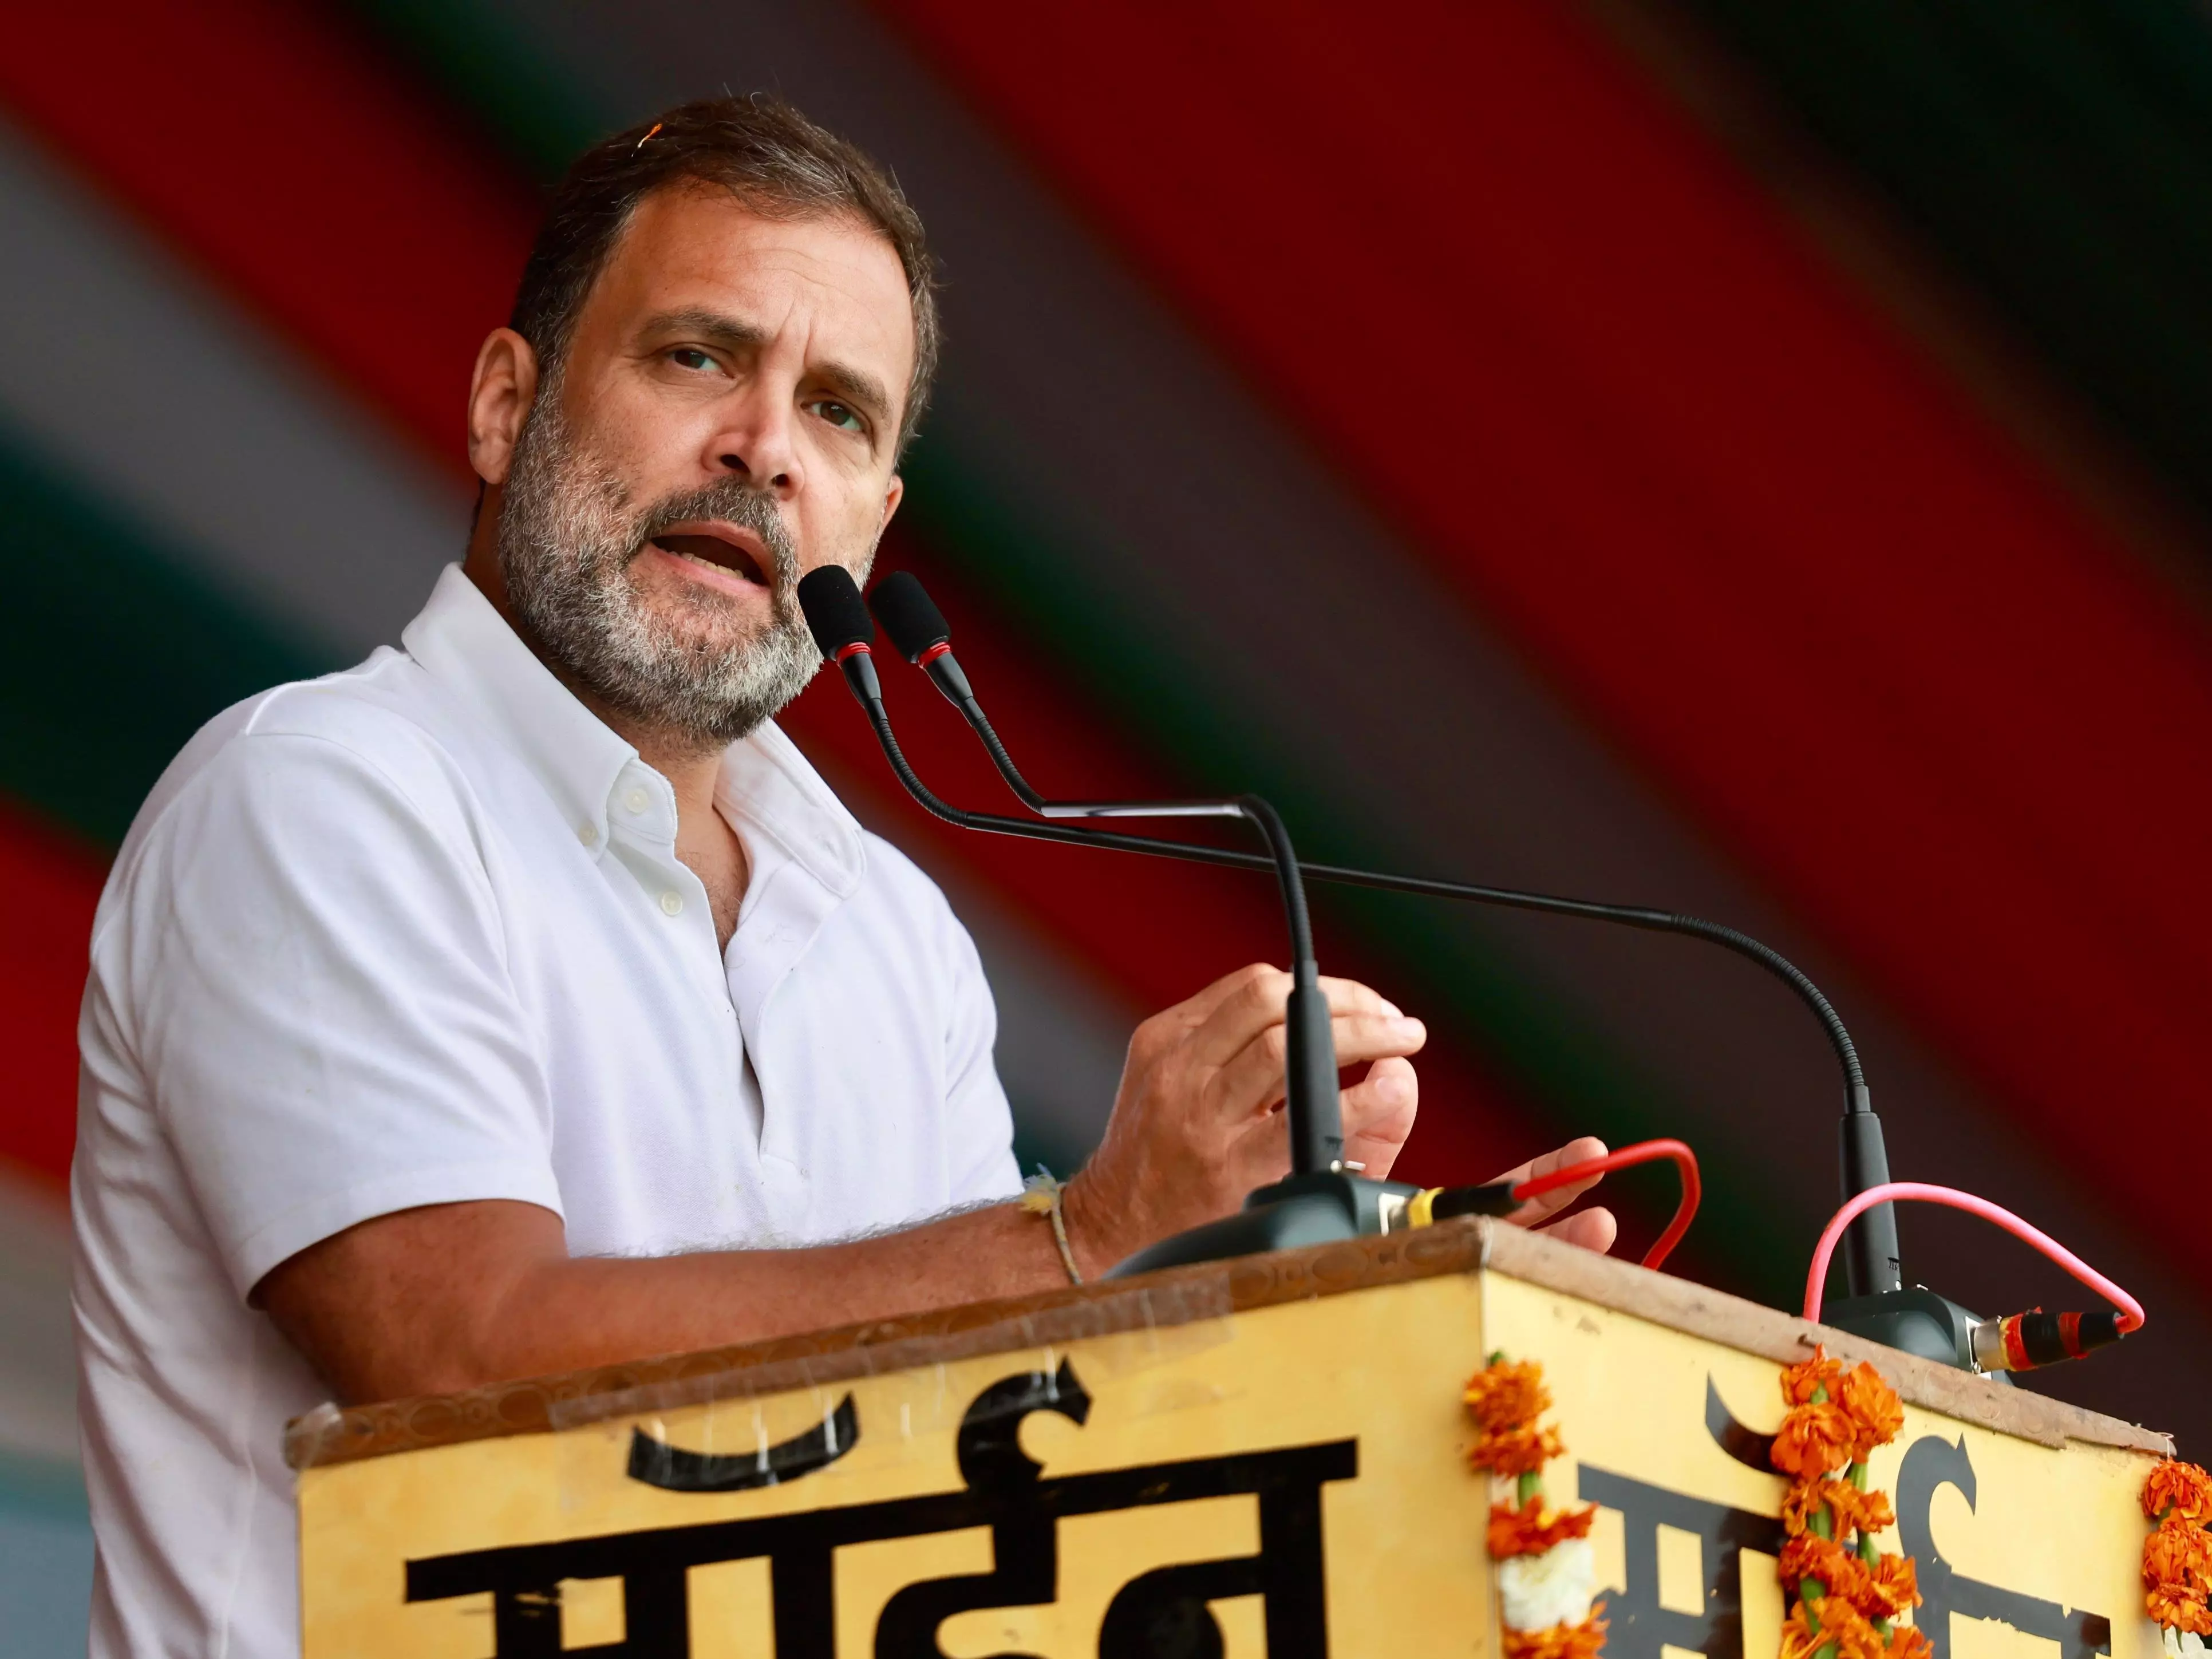 Rahul Gandhi Promises Rs 1 lakh Per Year to ‘Poor Women’ if Congress Comes to Power